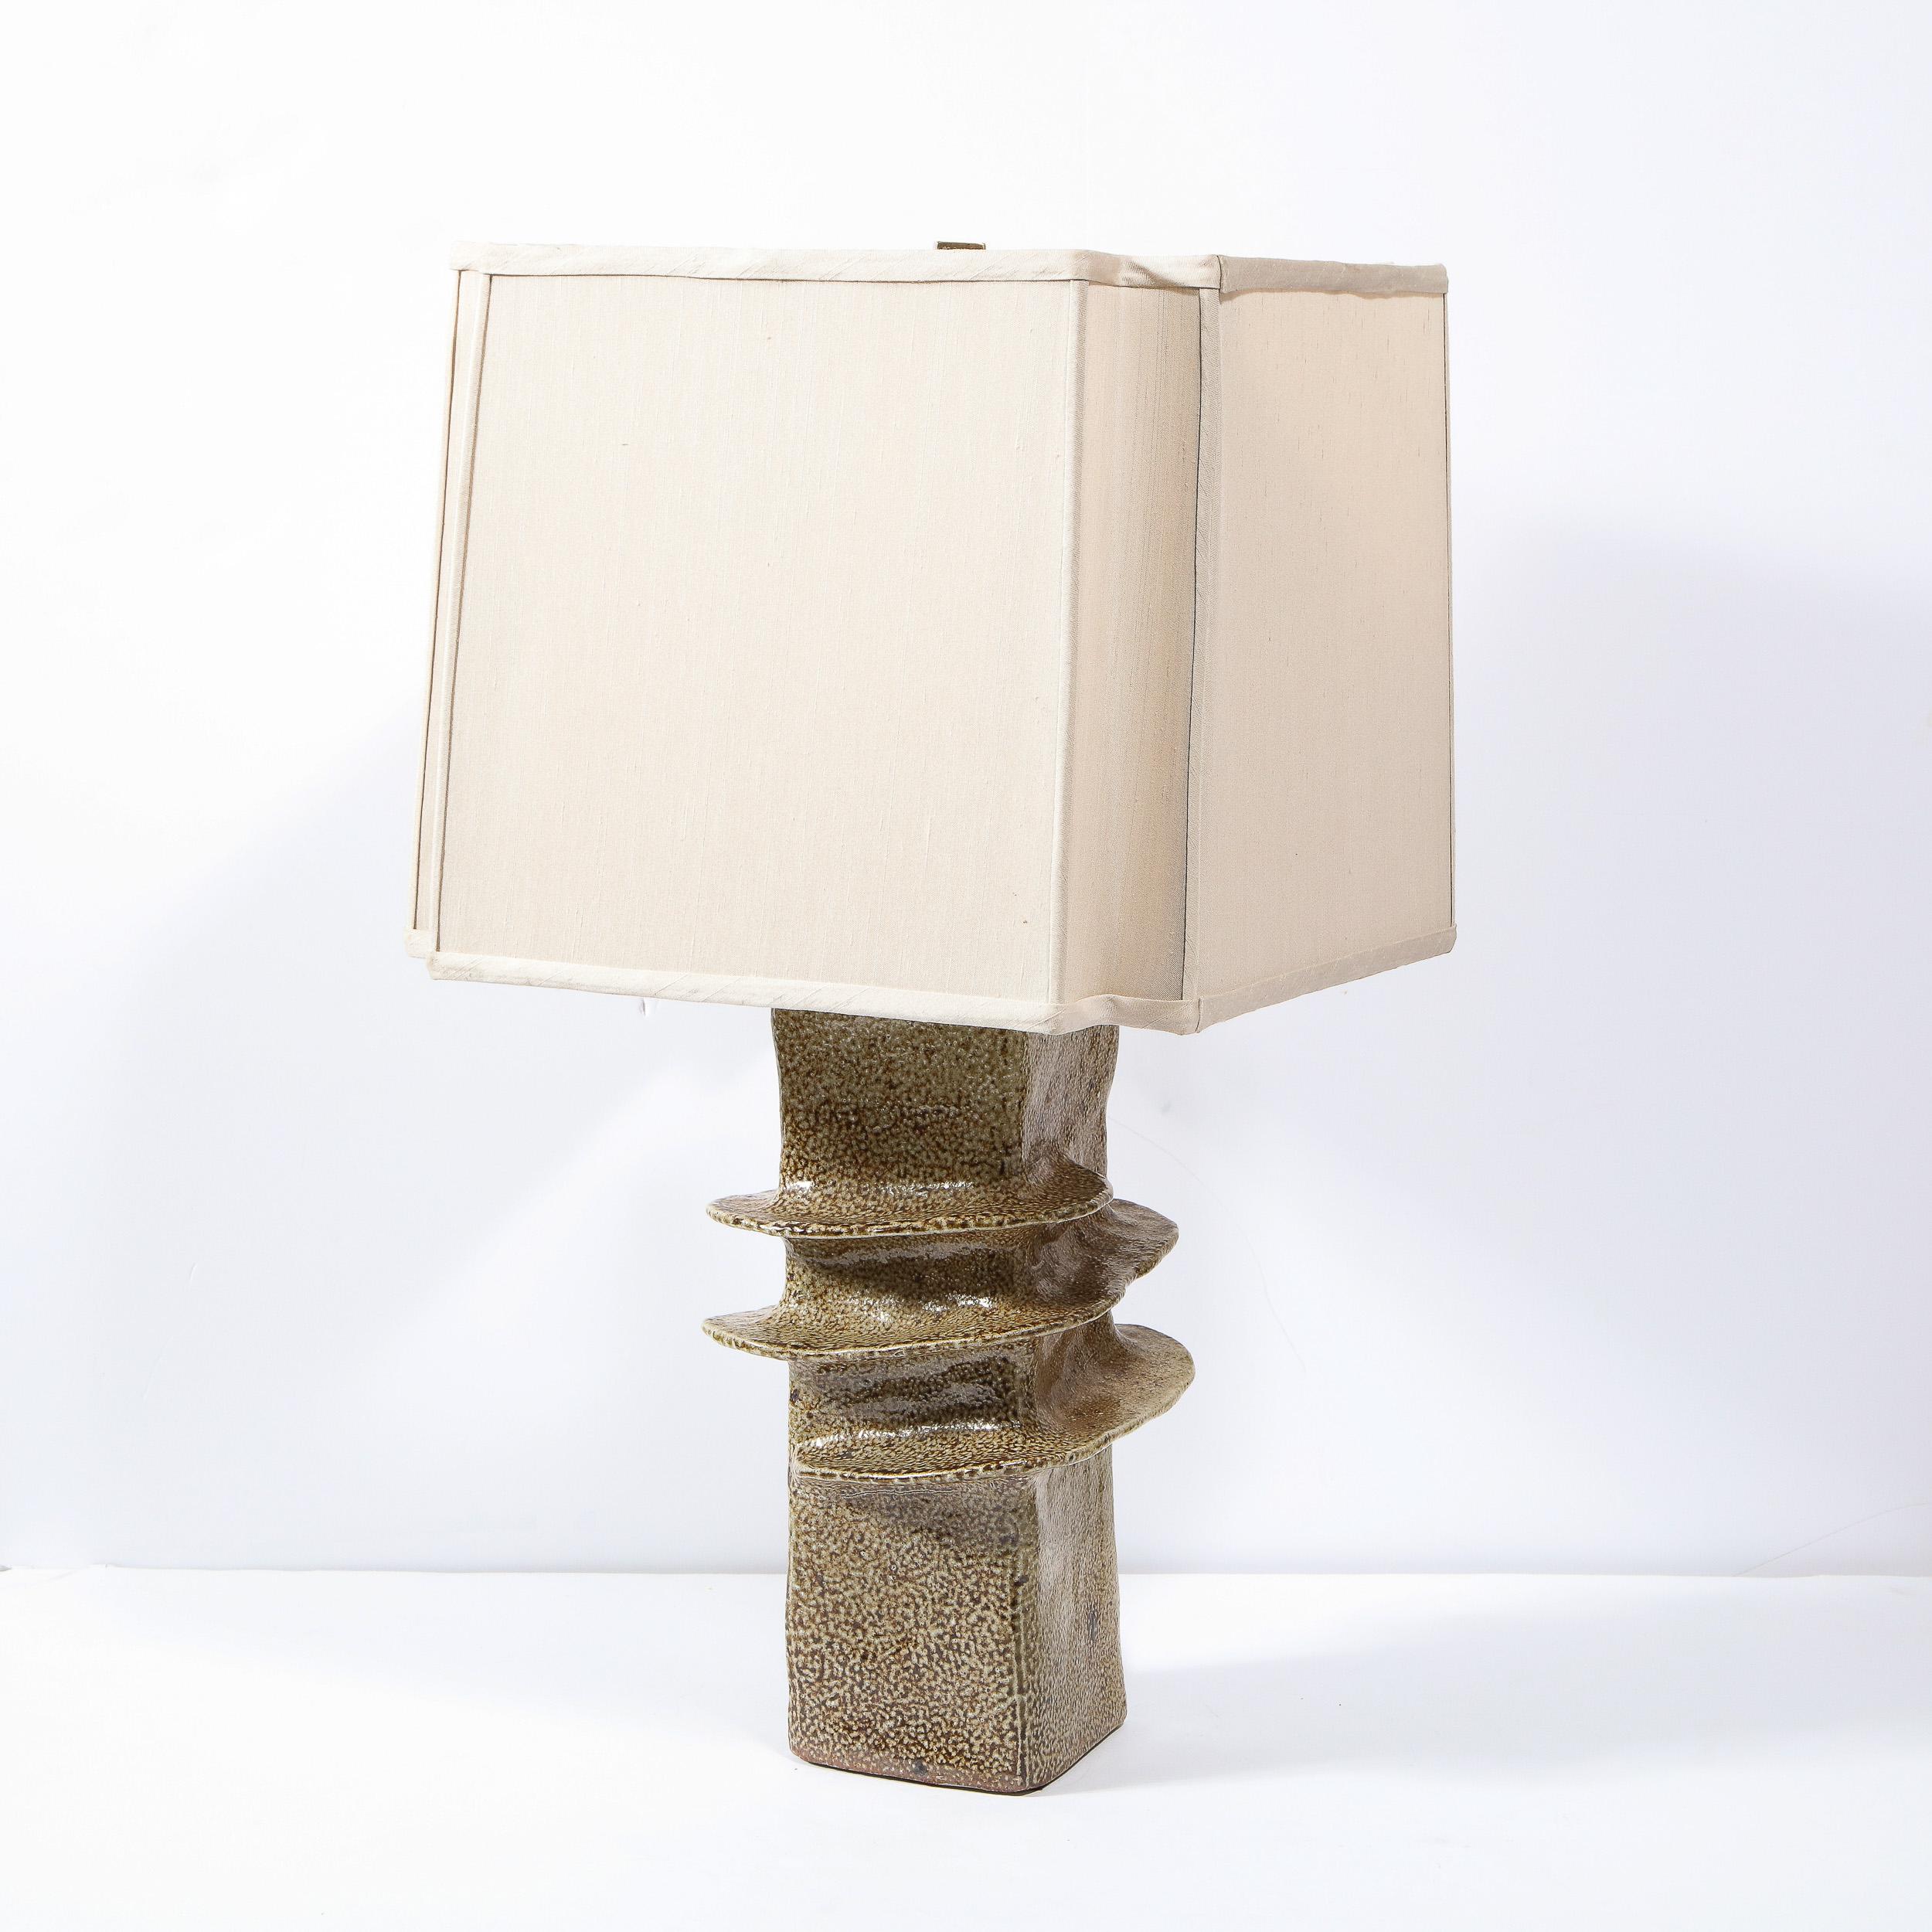 French Mid Century Modern Glazed Ceramic Pillar Table Lamp with Spiral Banding For Sale